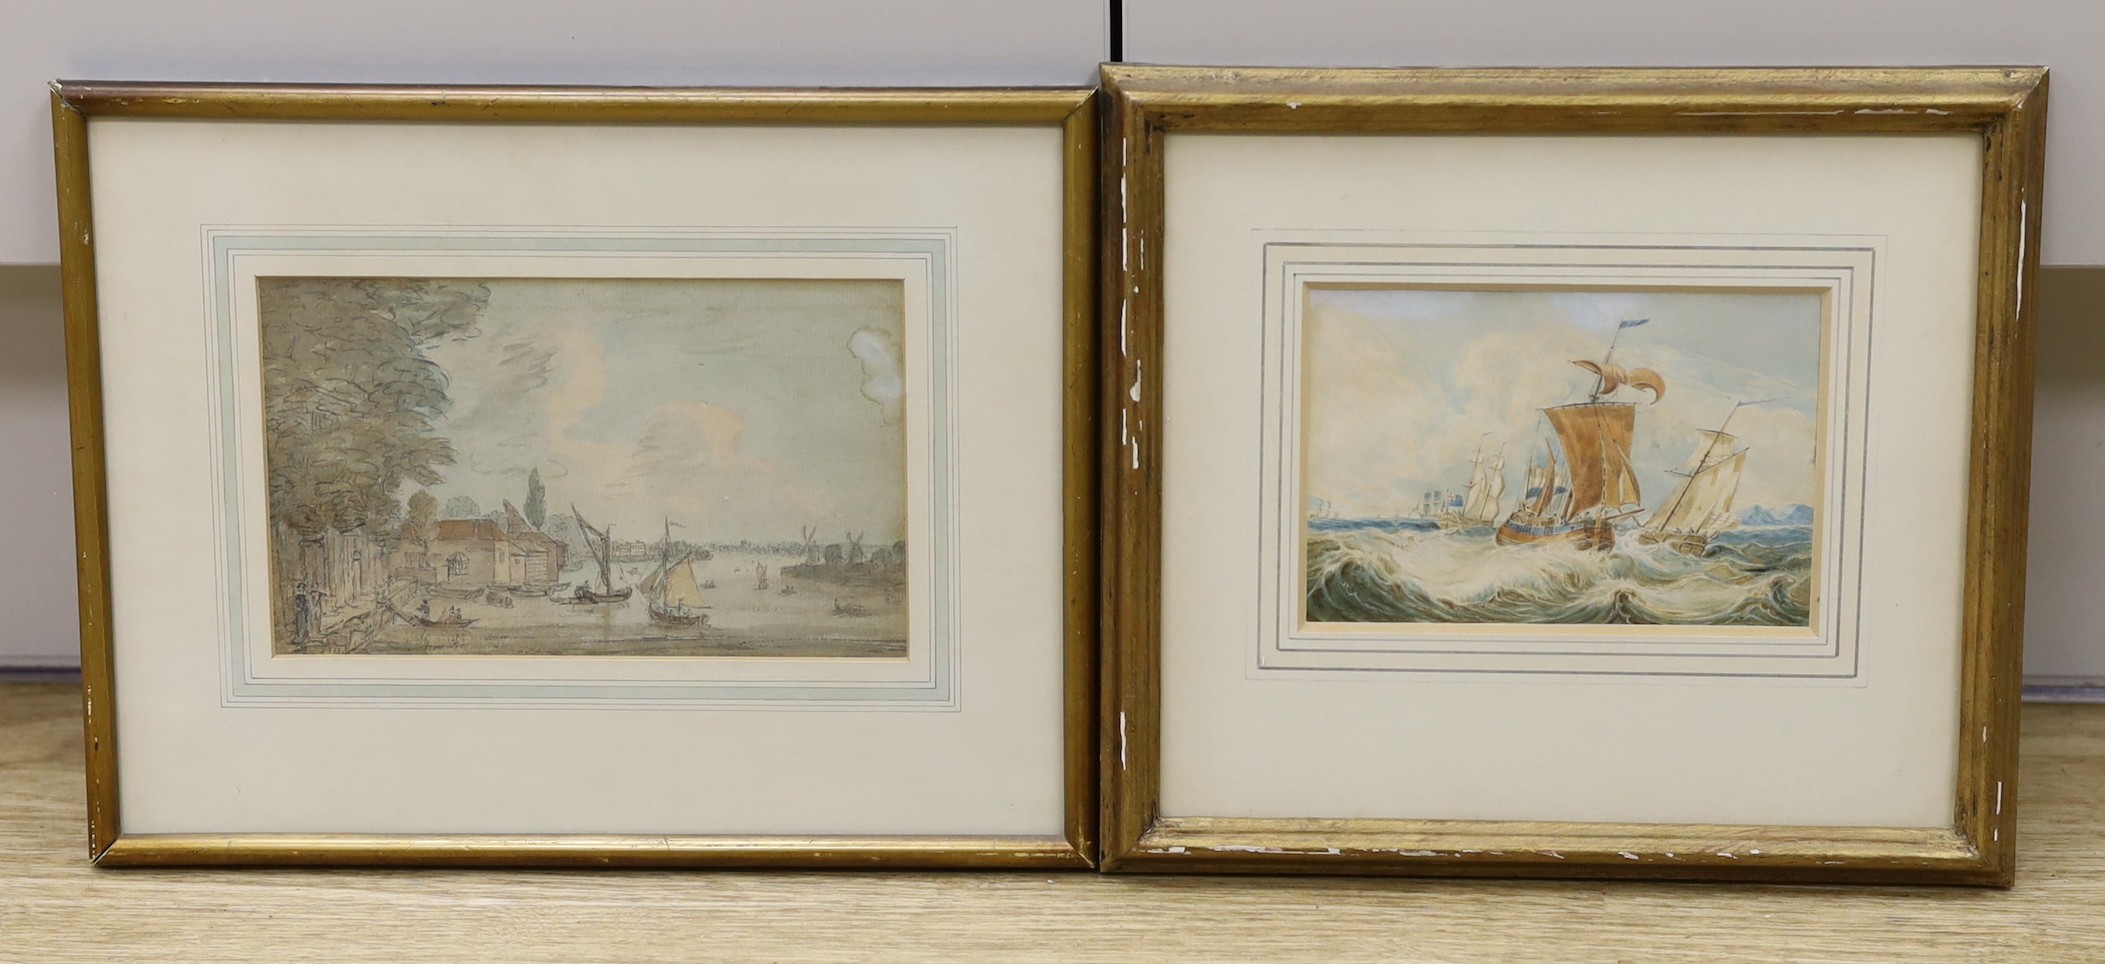 George Perfect Harding (1780-1853) , watercolour, Shipping off the coast, signed and dated 1829, 9 x 13cm and a watercolour sketch 'Along The Thames', 10 x 17cm                                                            